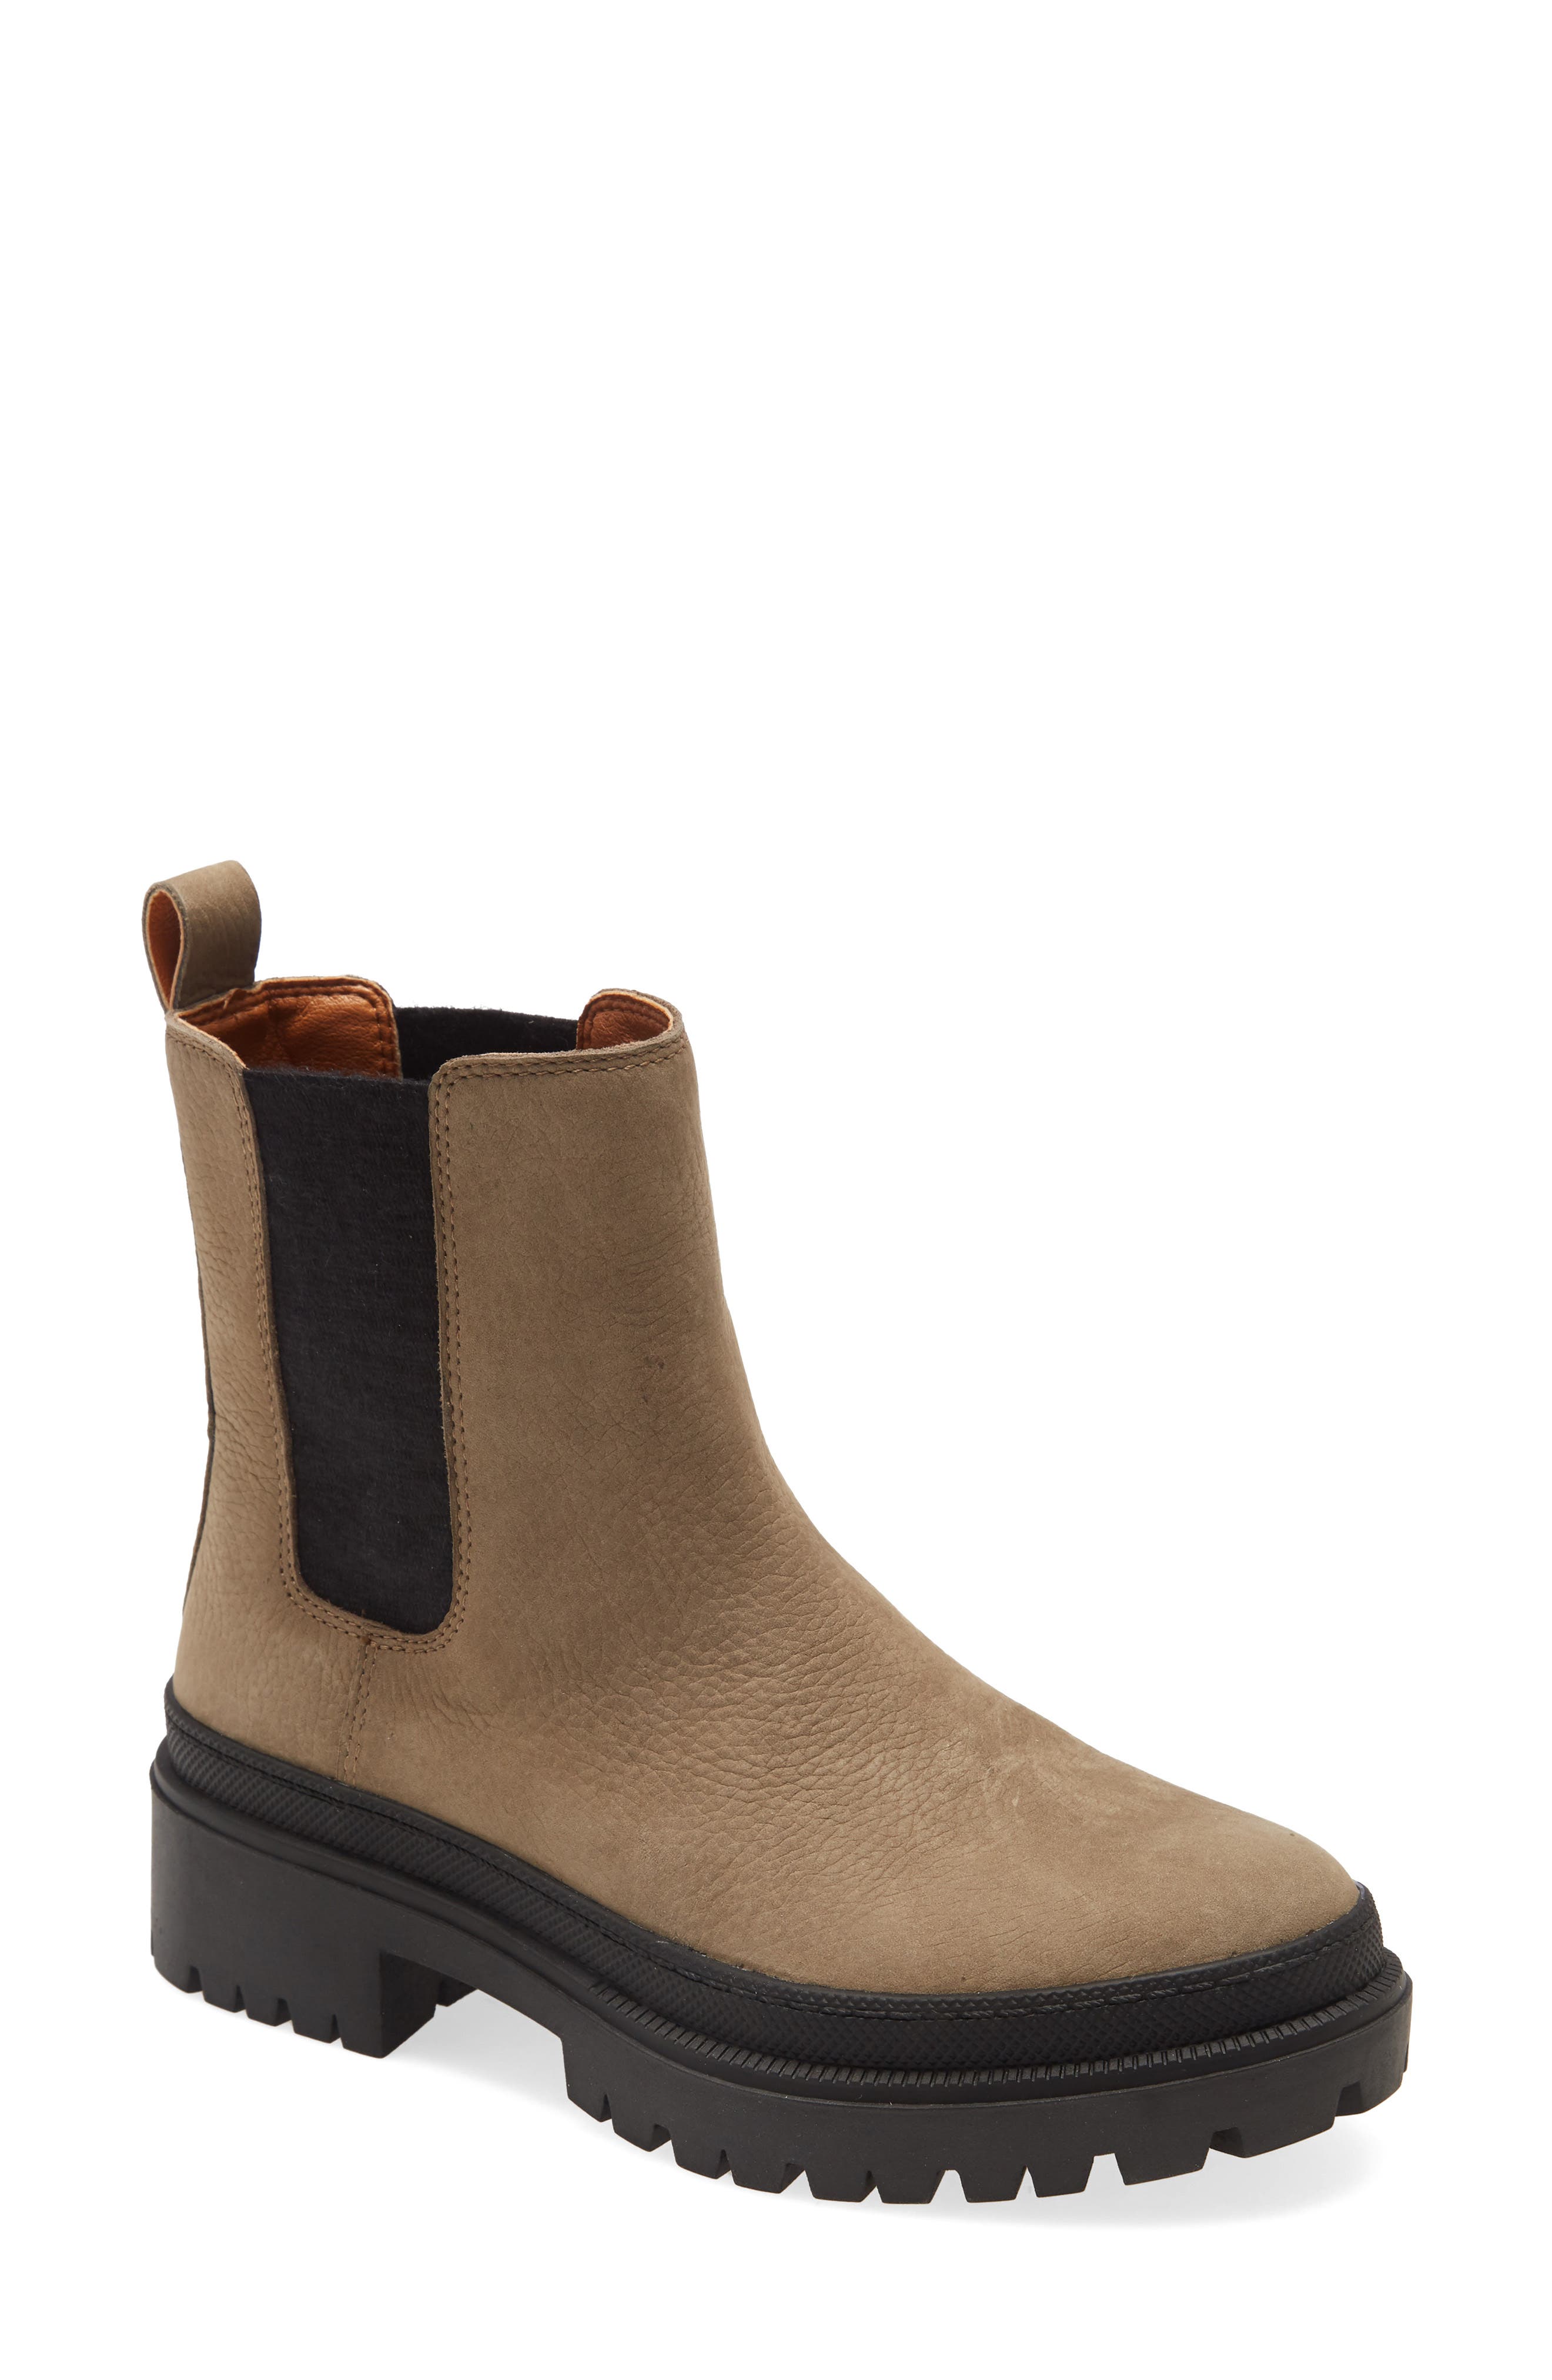 lucky brand booties leather